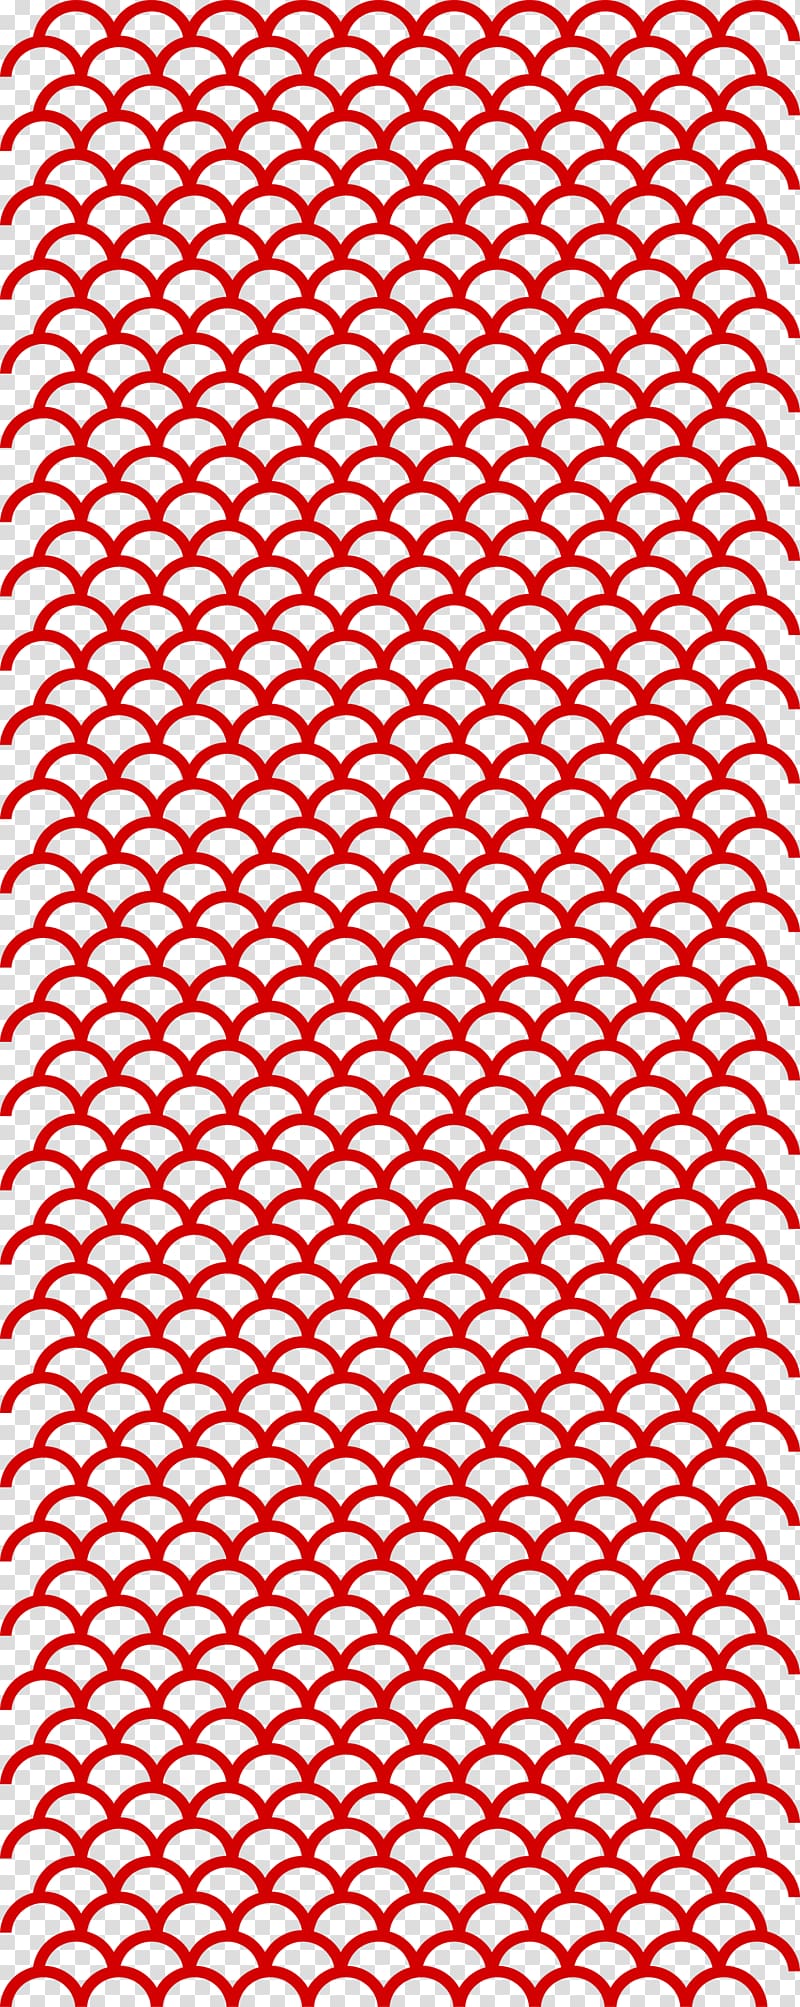 https://p7.hiclipart.com/preview/477/869/257/motif-fish-scale-pattern-wave-shading.jpg